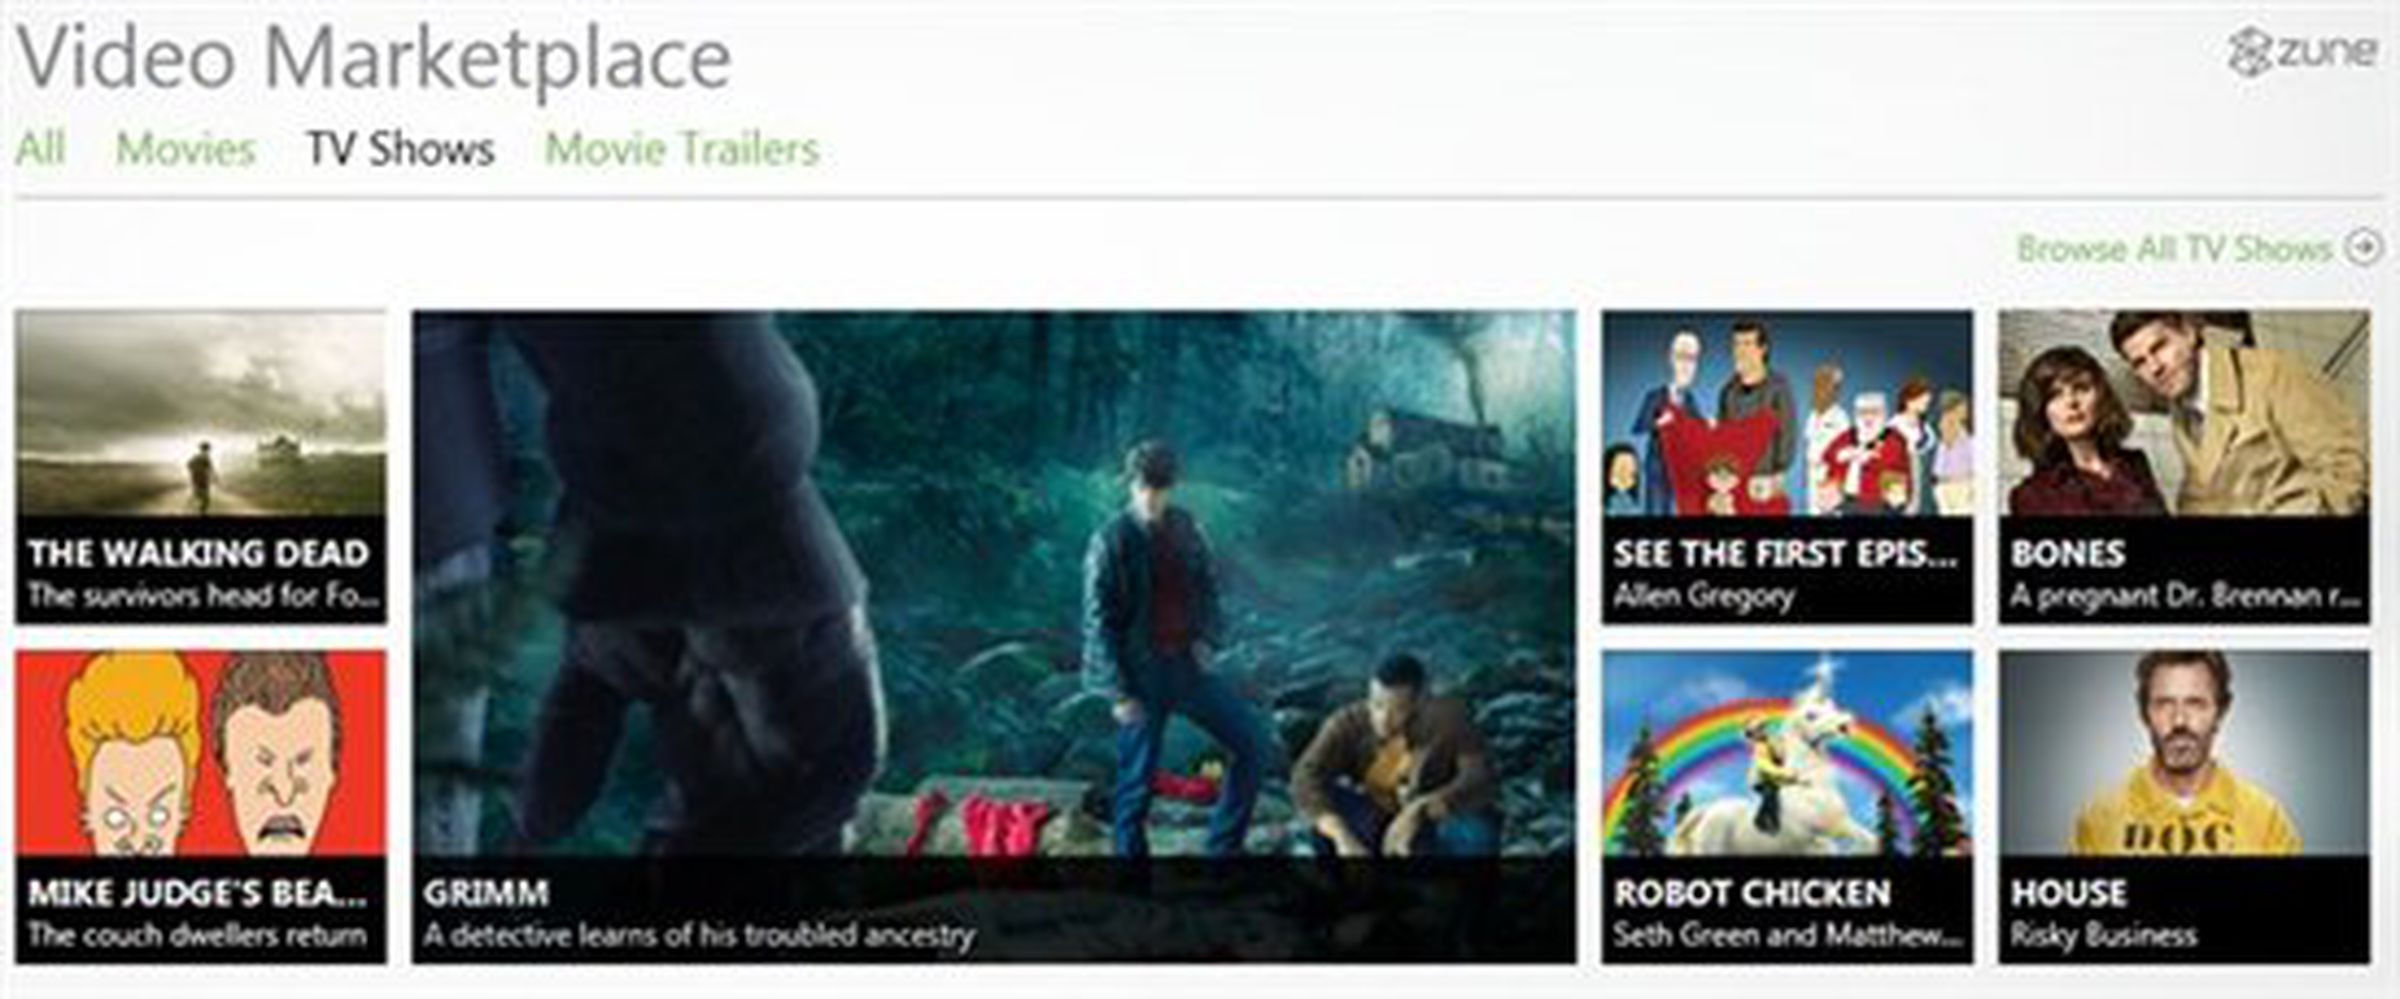 Xbox.com 'Social' revamp in pictures